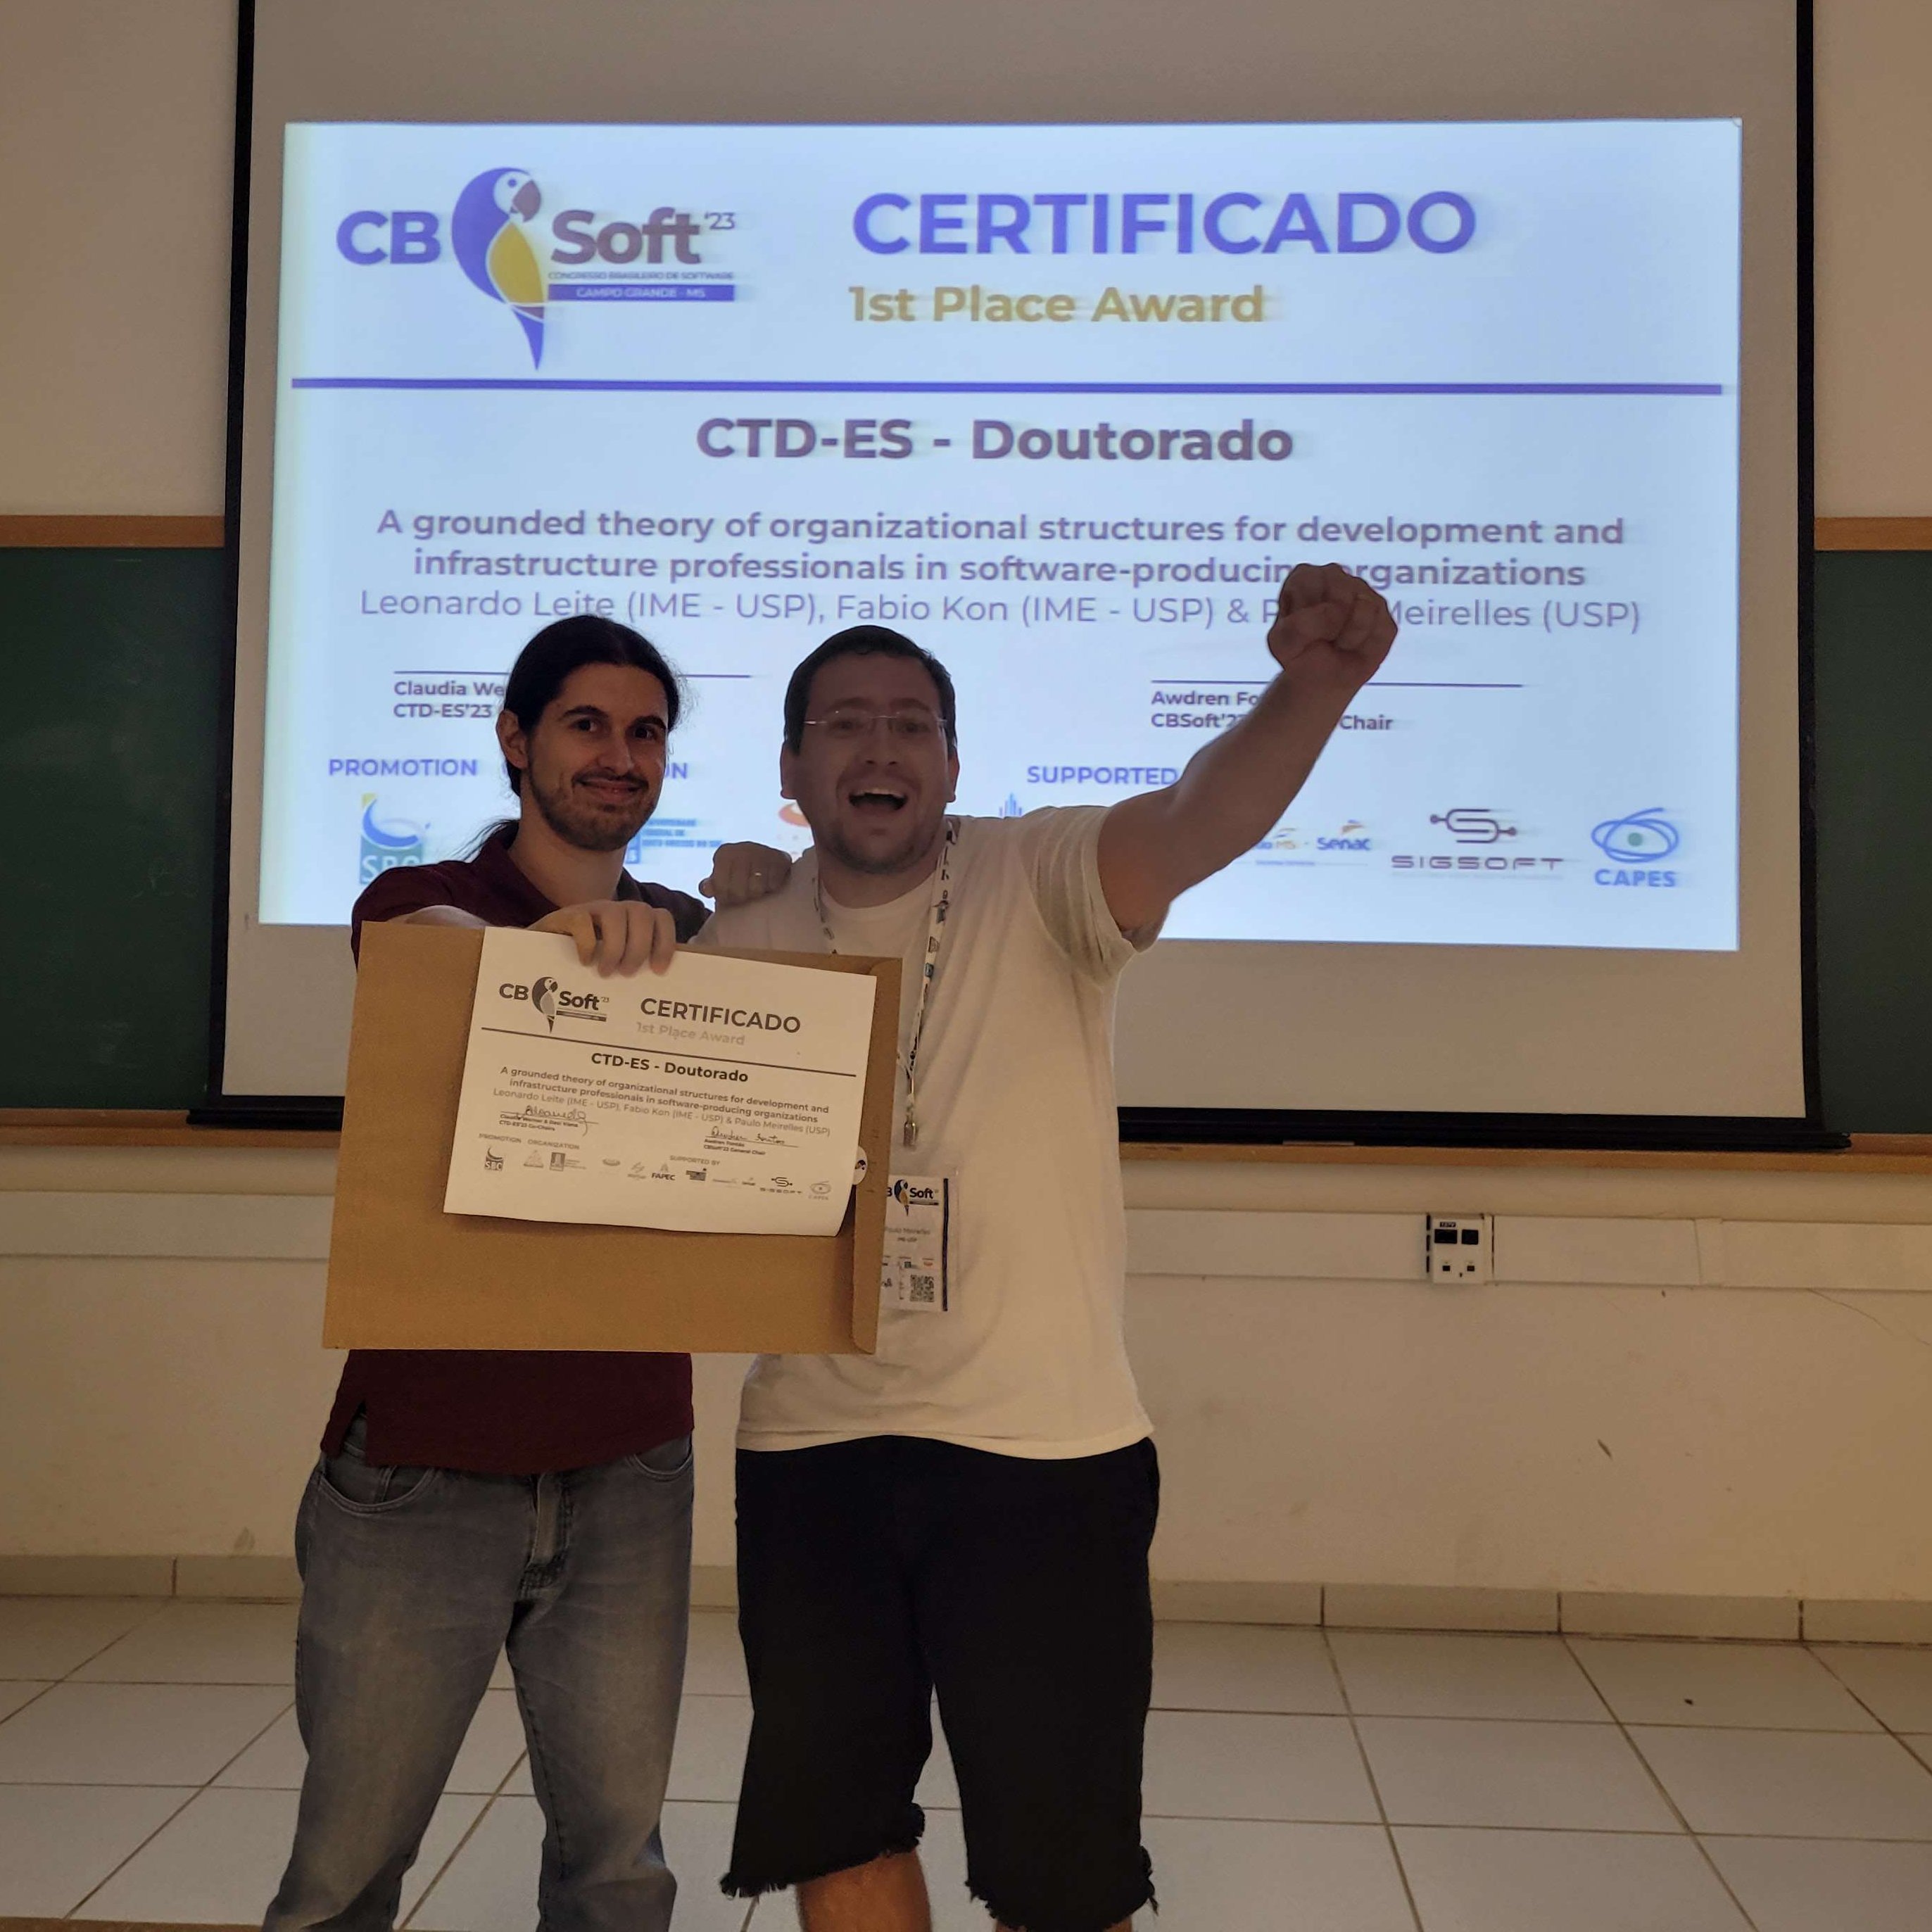 Leonardo and Paulo holding the award certificate; Paulo celebrating with raised fist; behind a big screen displaying the award certificate.